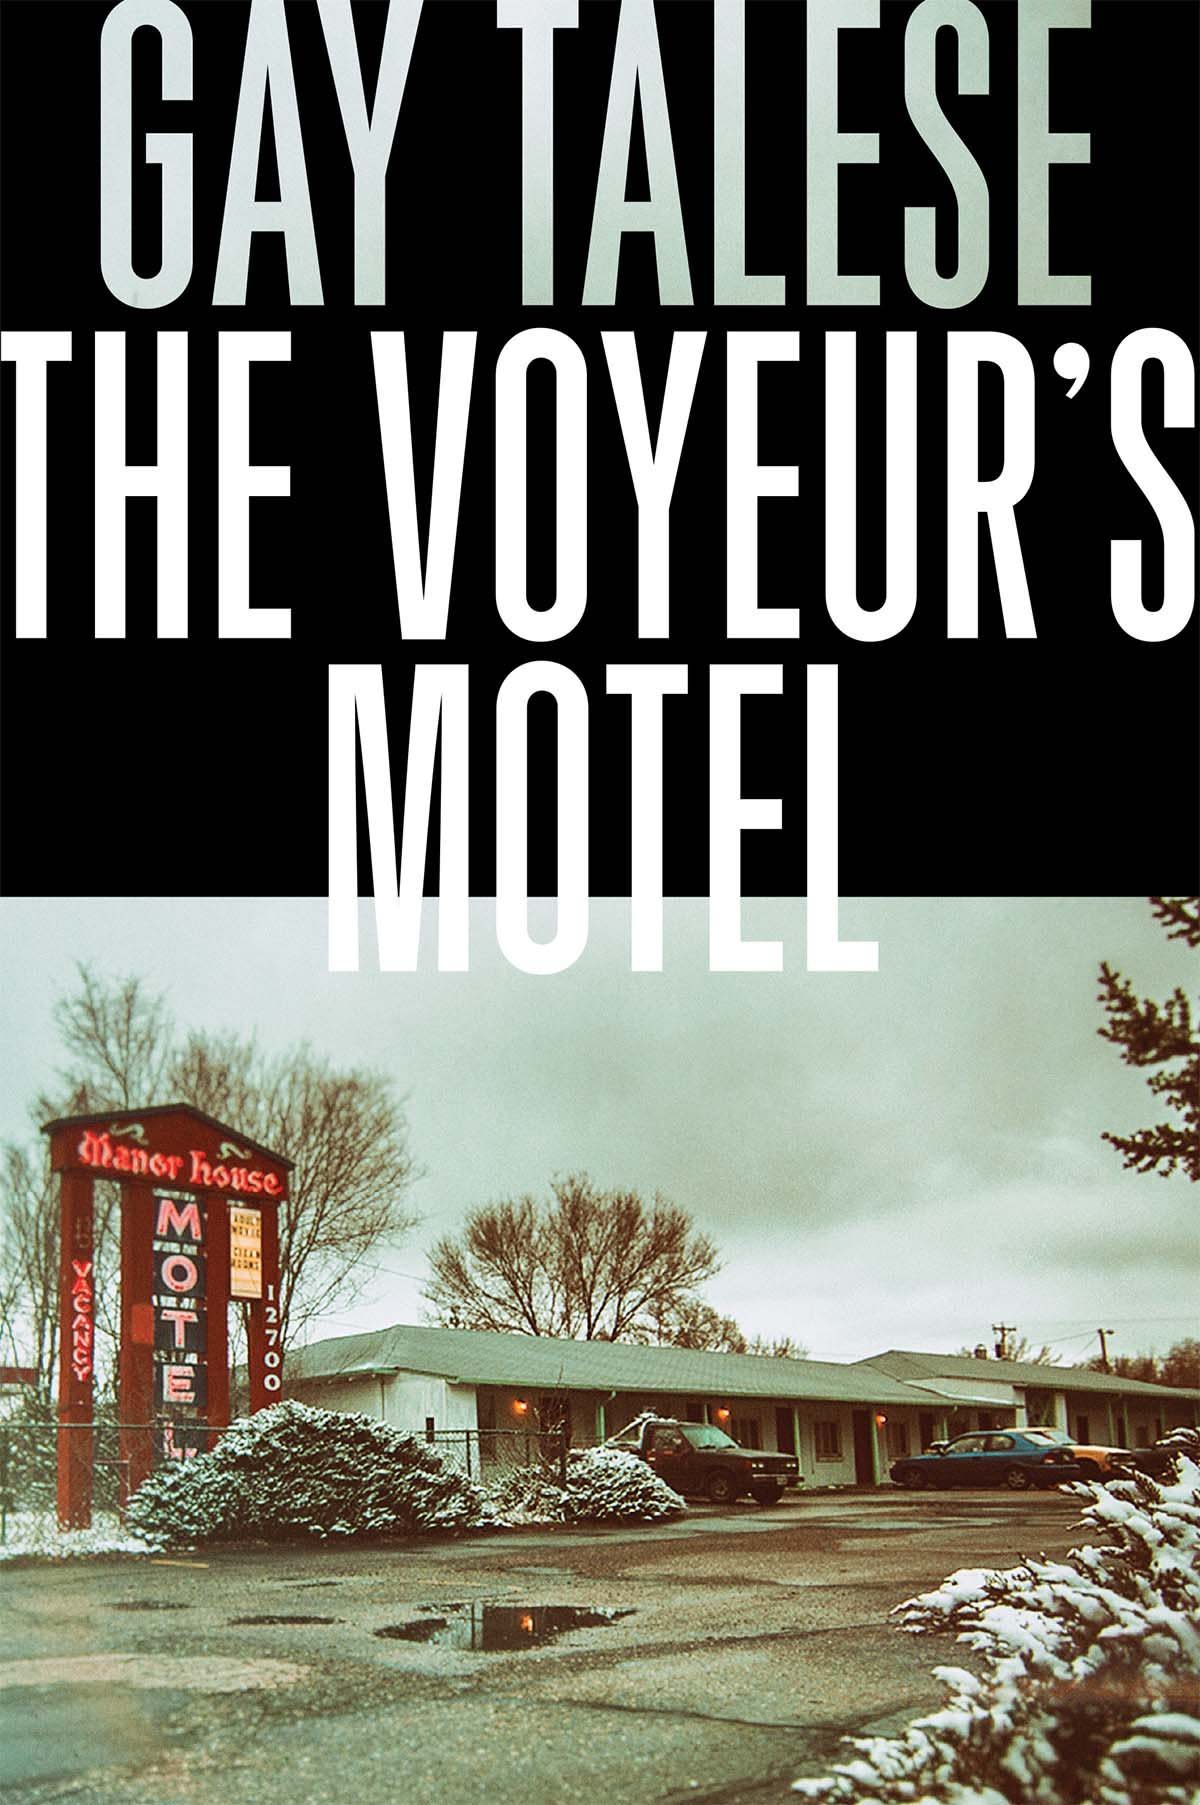 Author Gay Talese Flip-Flops On The Voyeurs Motel And Now Stands By Book While Filmmakers Try To Figure Out Next Steps image